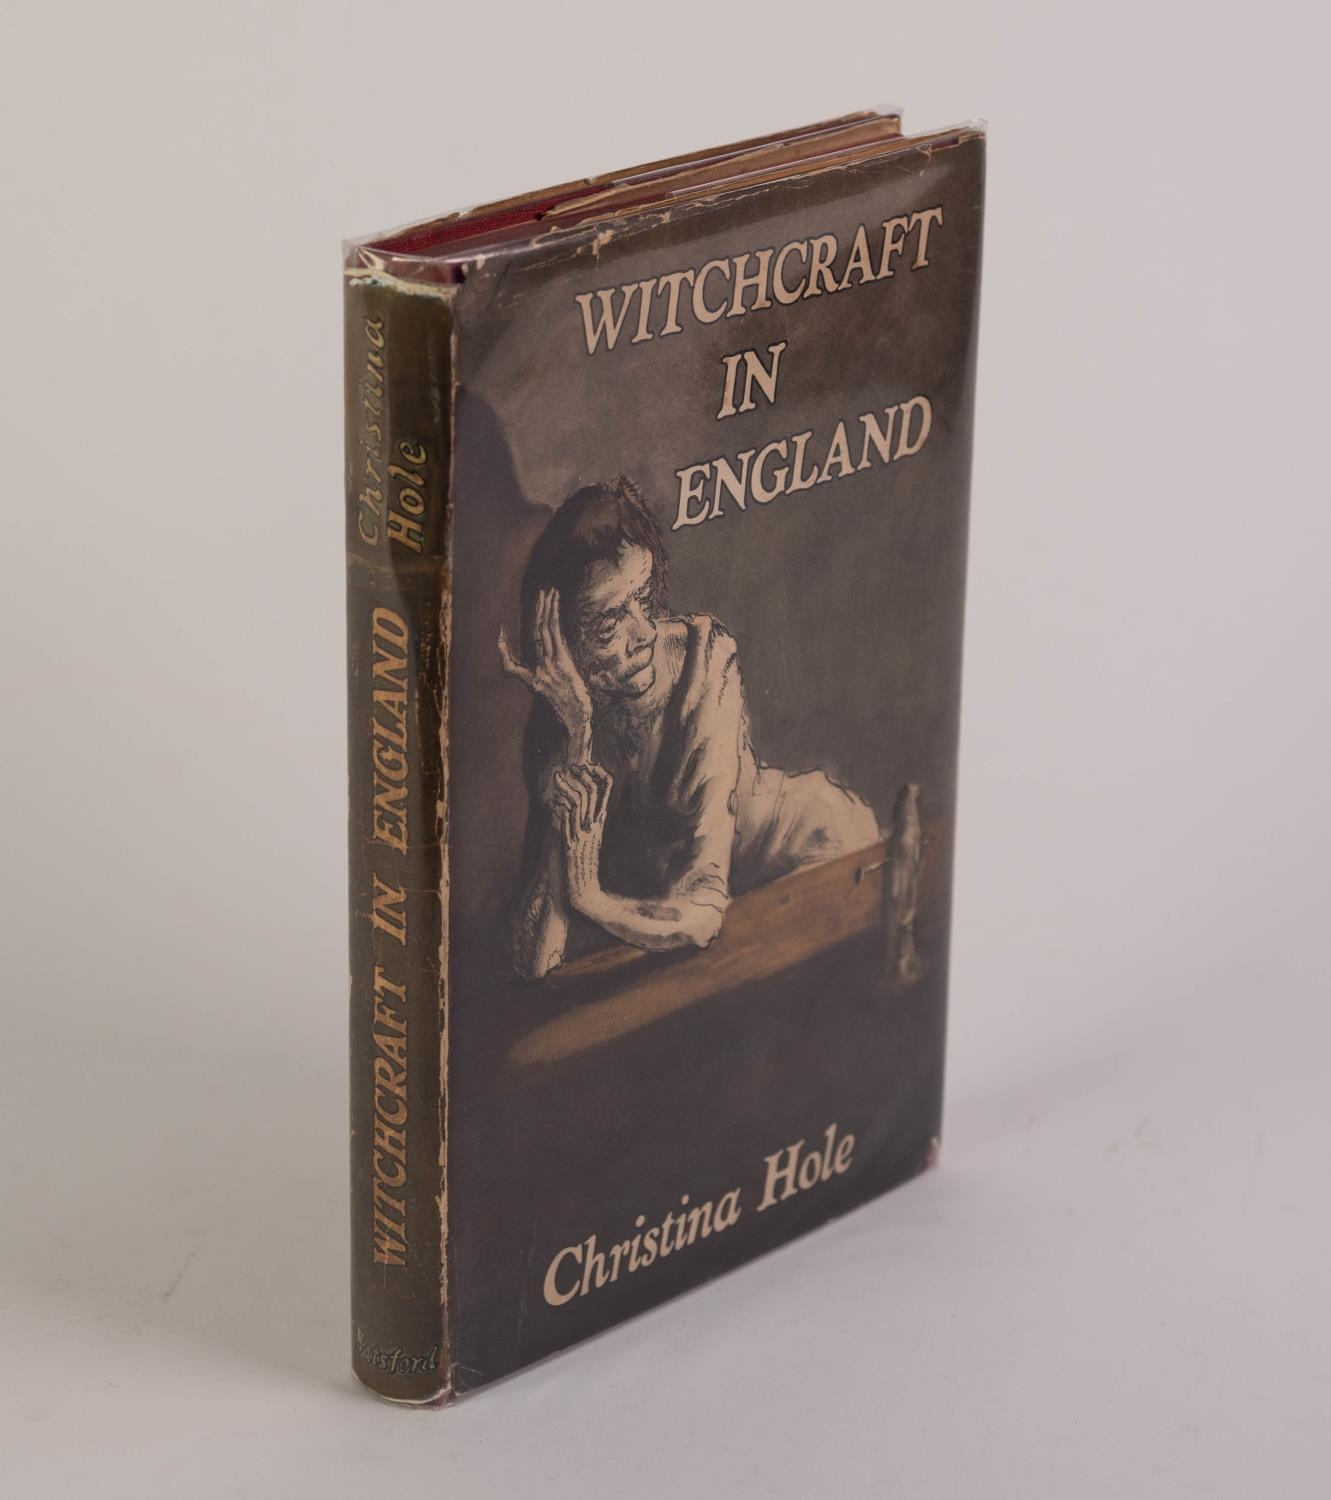 WITCHCRAFT FOLK-LORE. Christina Hole - Witchcraft in England, pub Batsford, first published 1945,